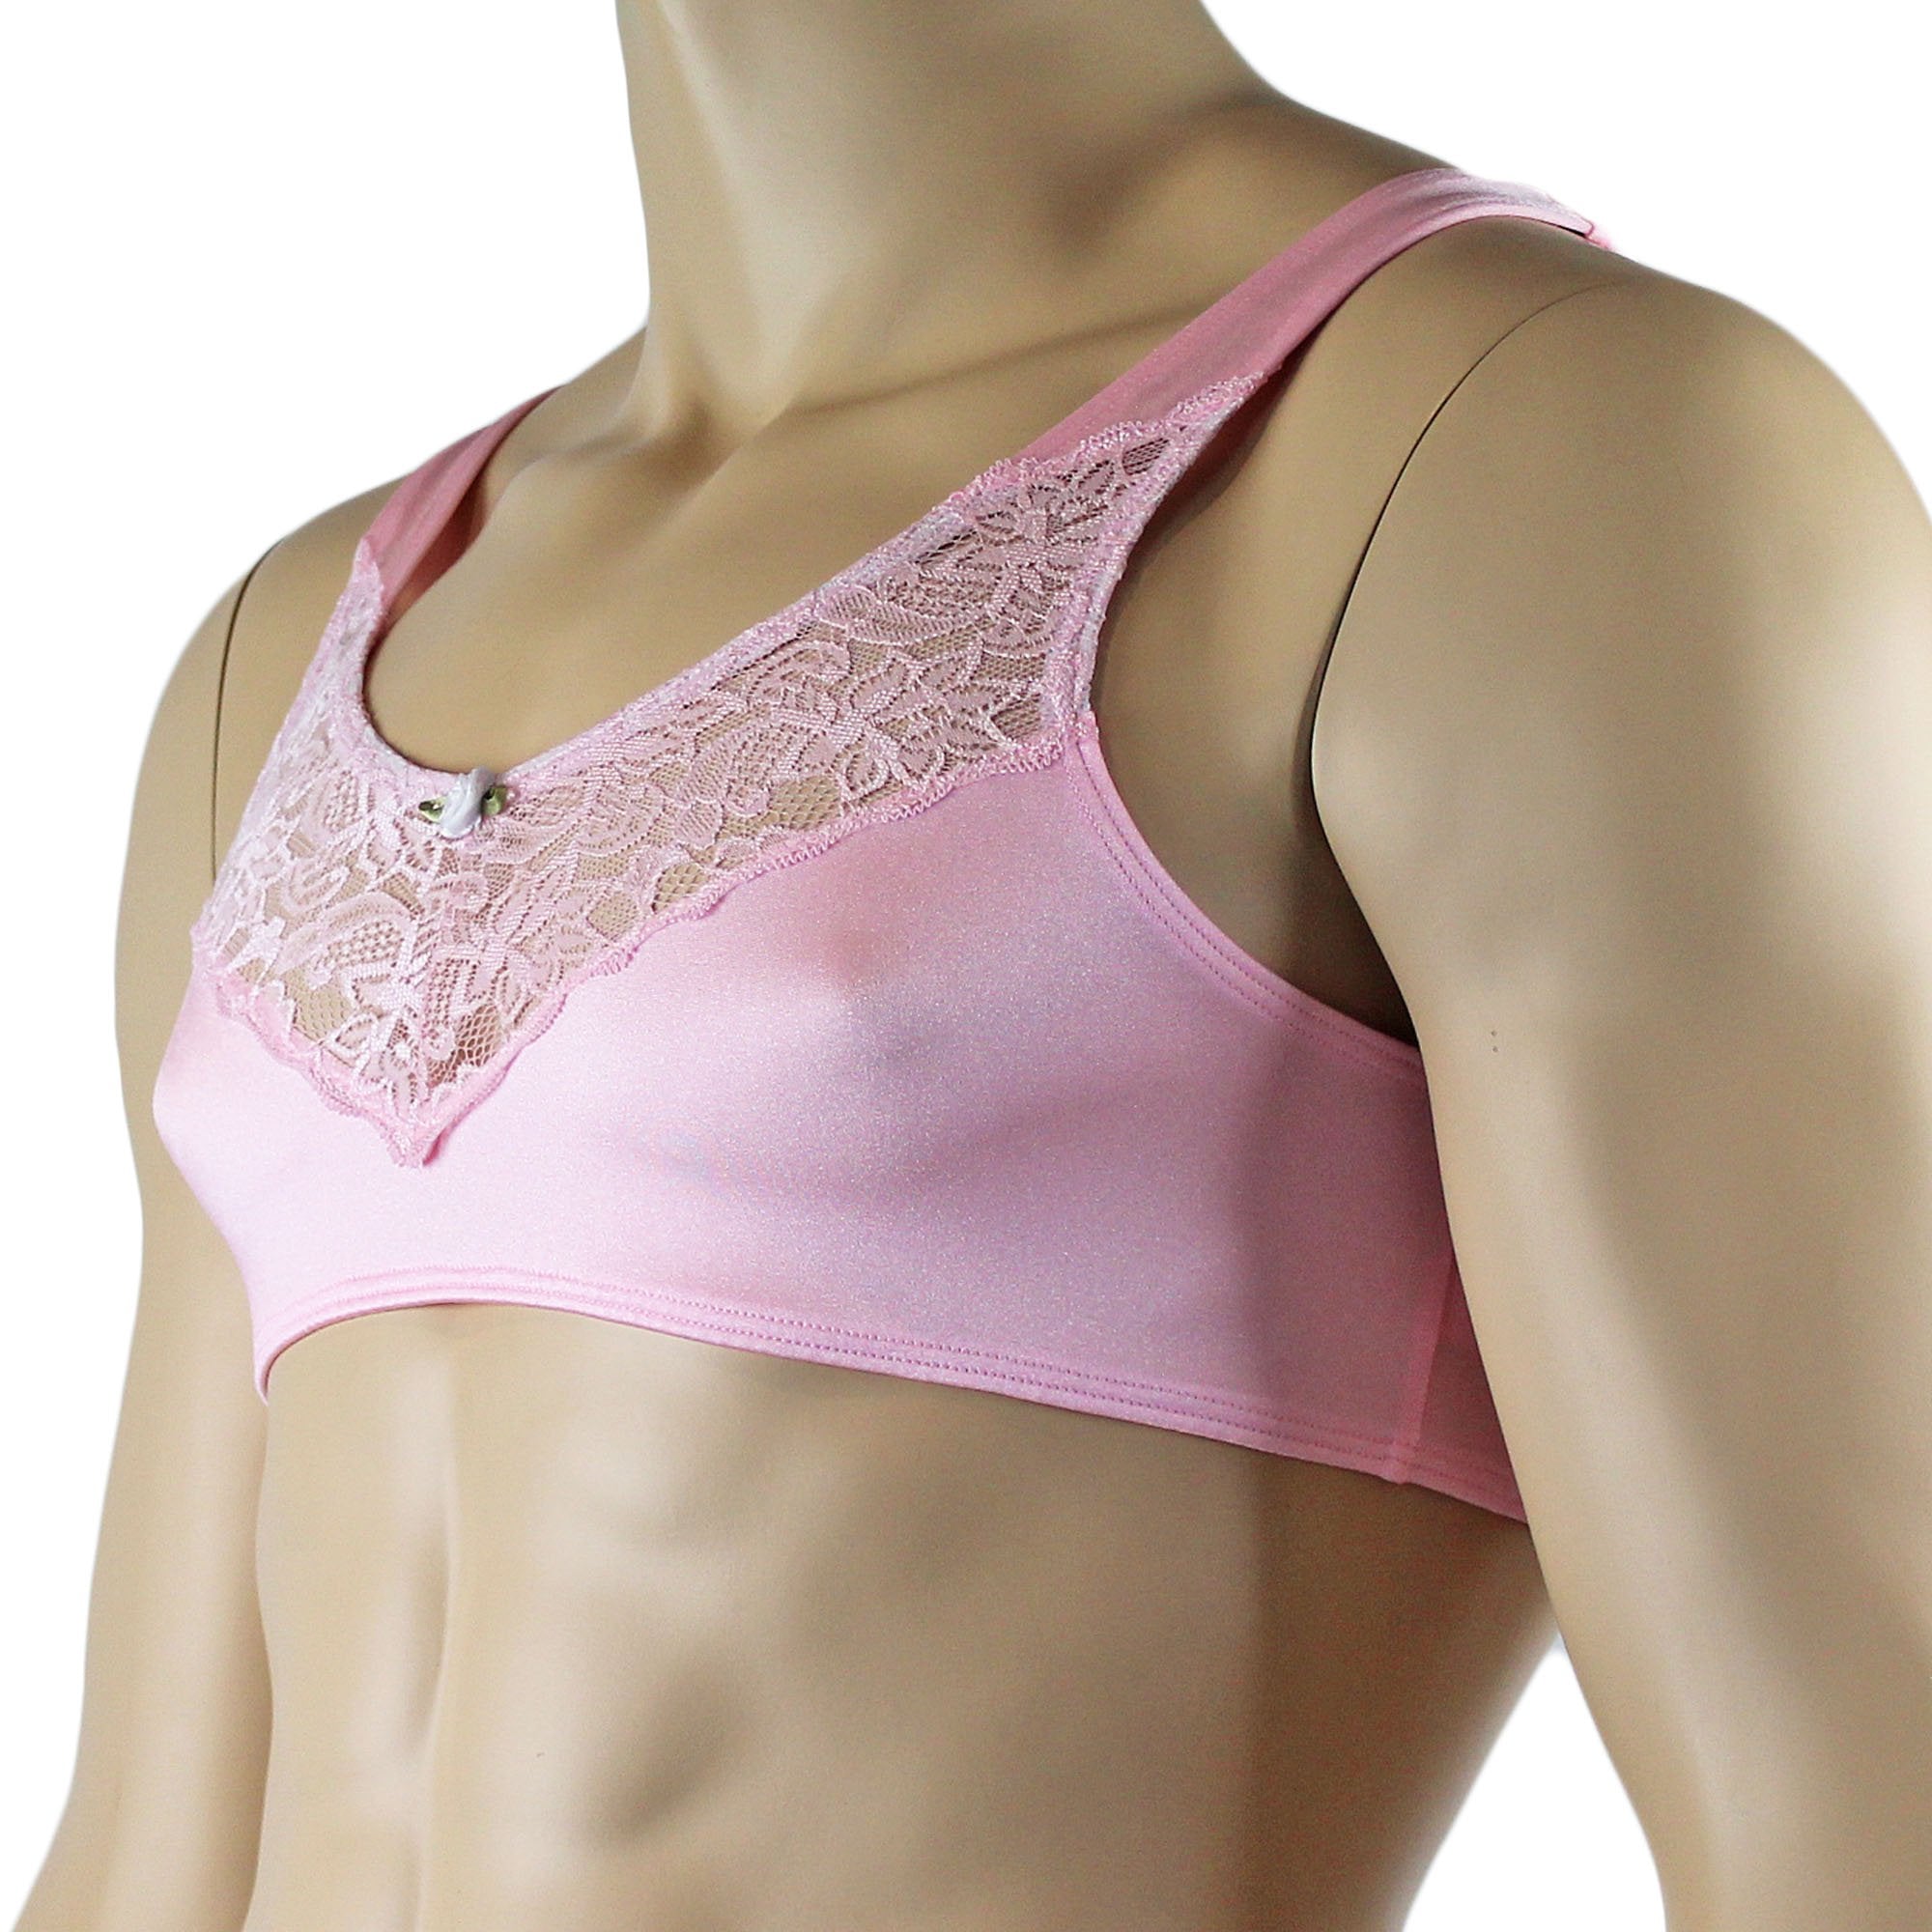 Male Penny Lingerie Bra Top with V Lace Front Light Pink